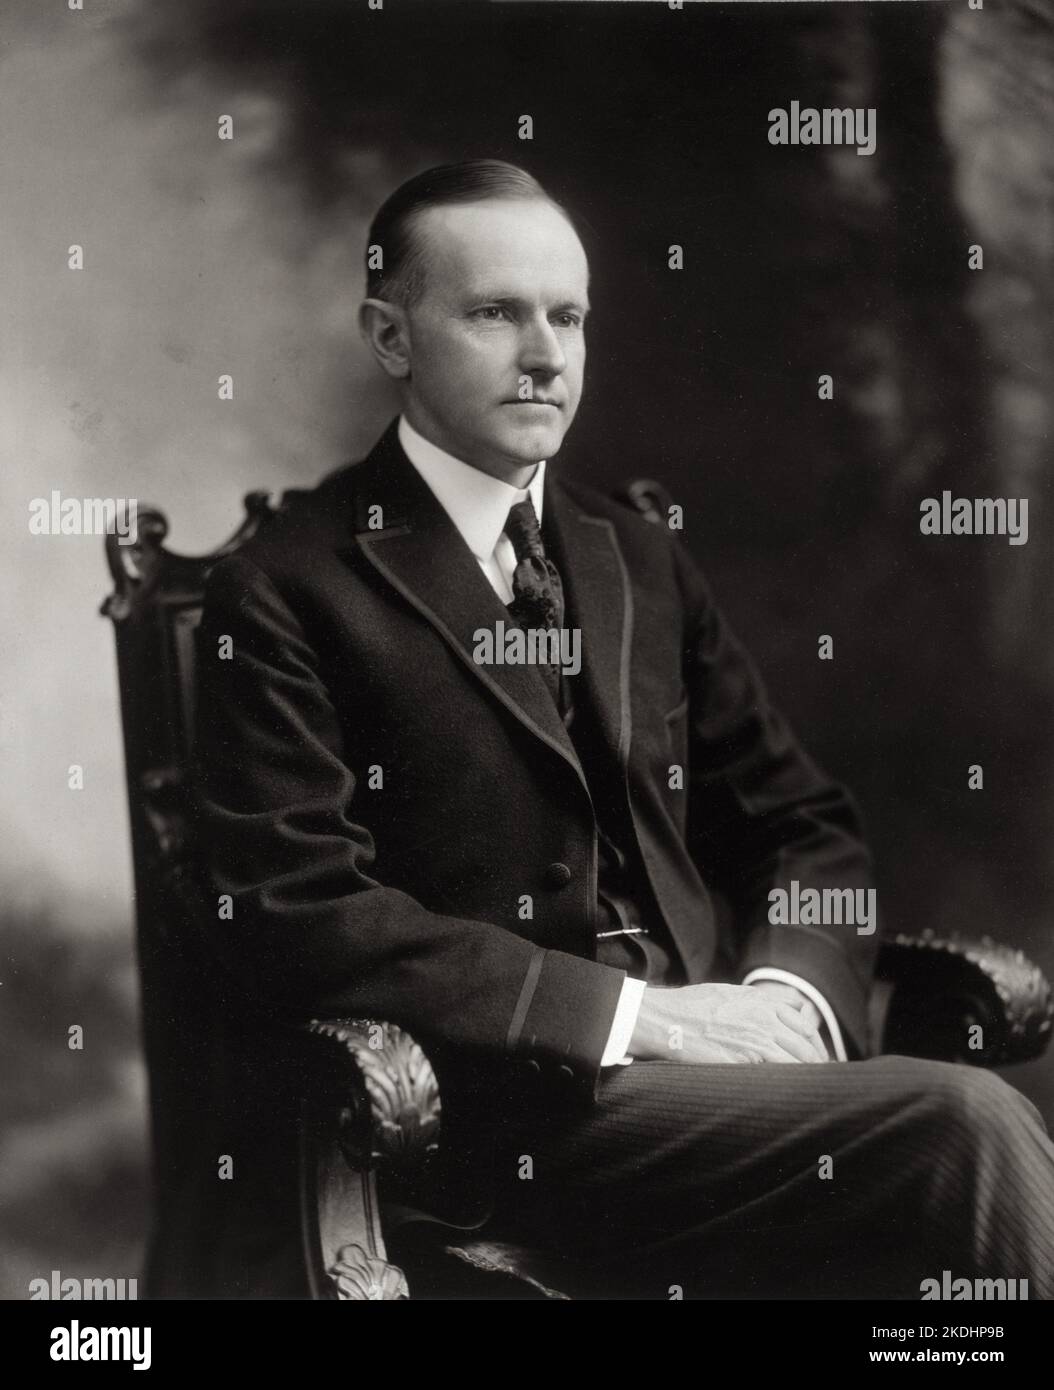 A portrait of US President Calvin Coolidge from 1919 when he was Governor of Massachusetts Stock Photo